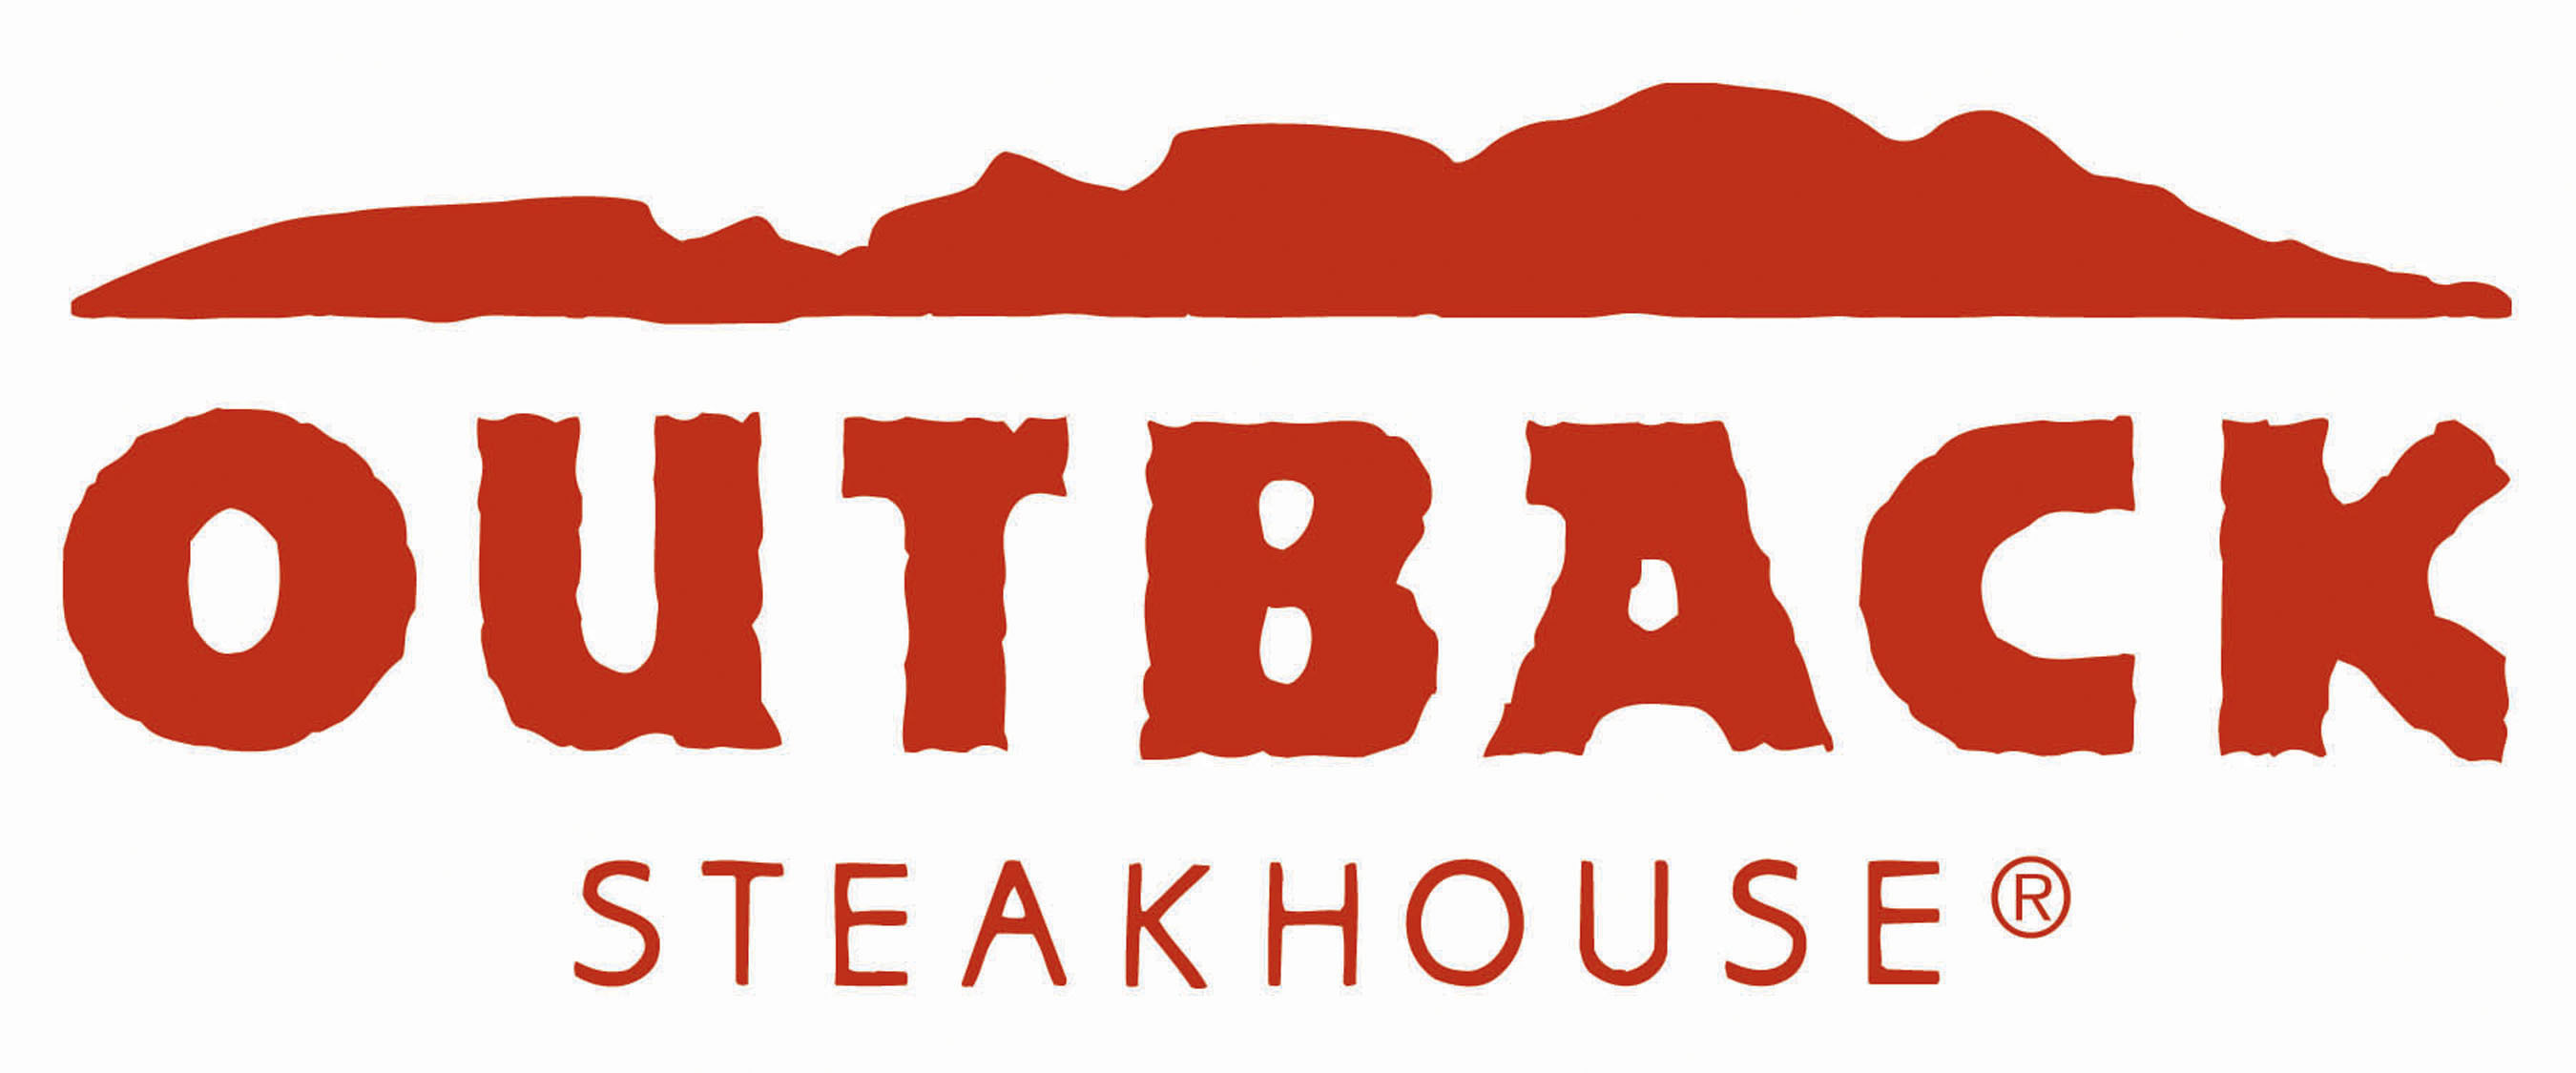 Outback Steakhouse. (PRNewsFoto/Outback Steakhouse)